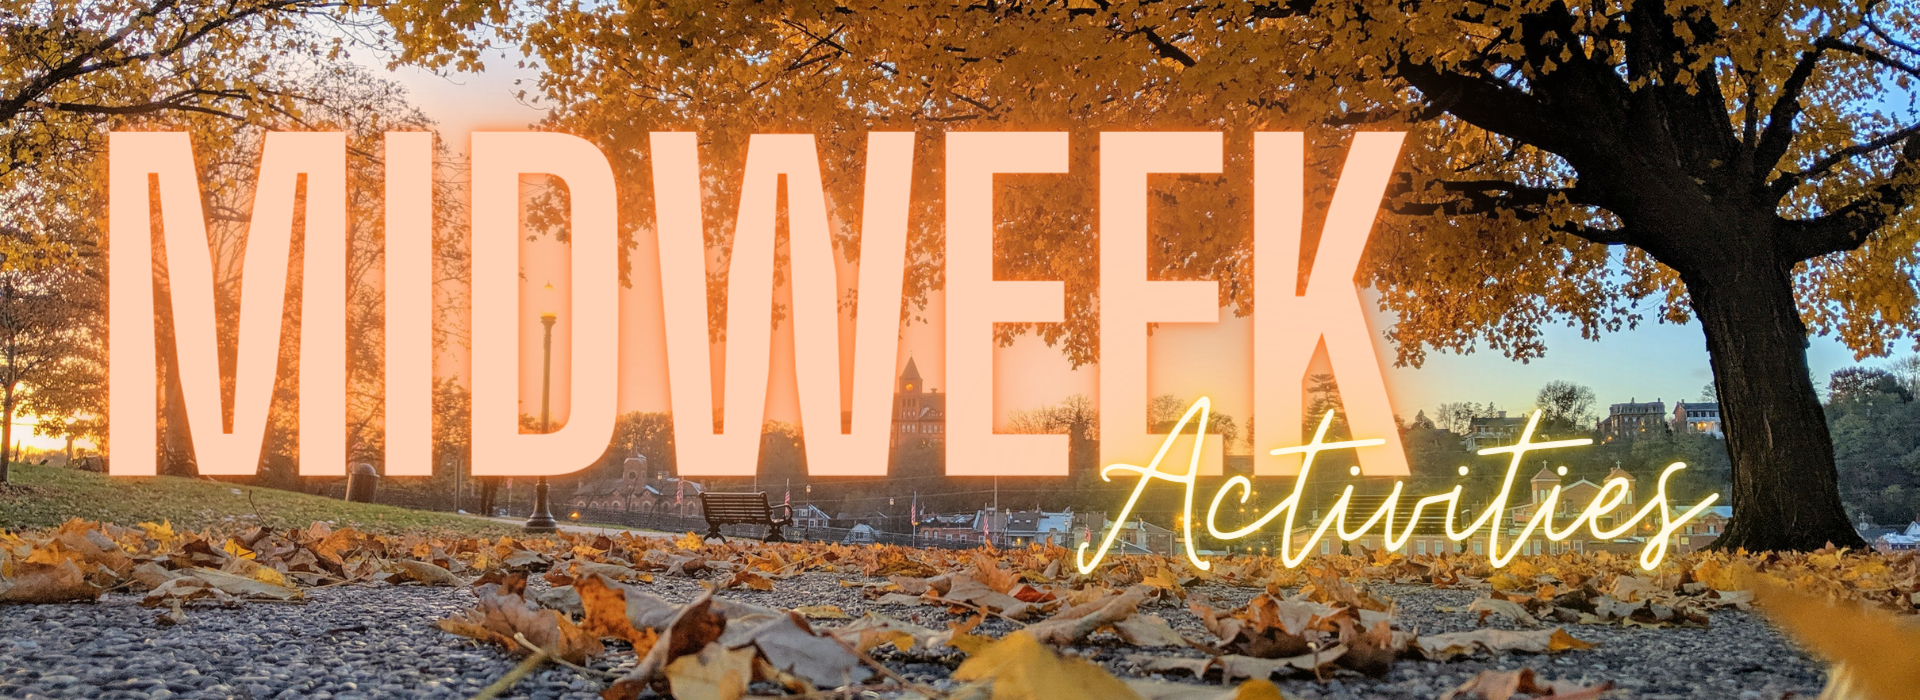 Neon glowing text says Midweek Activities placed over a scene of fall trees and leaves